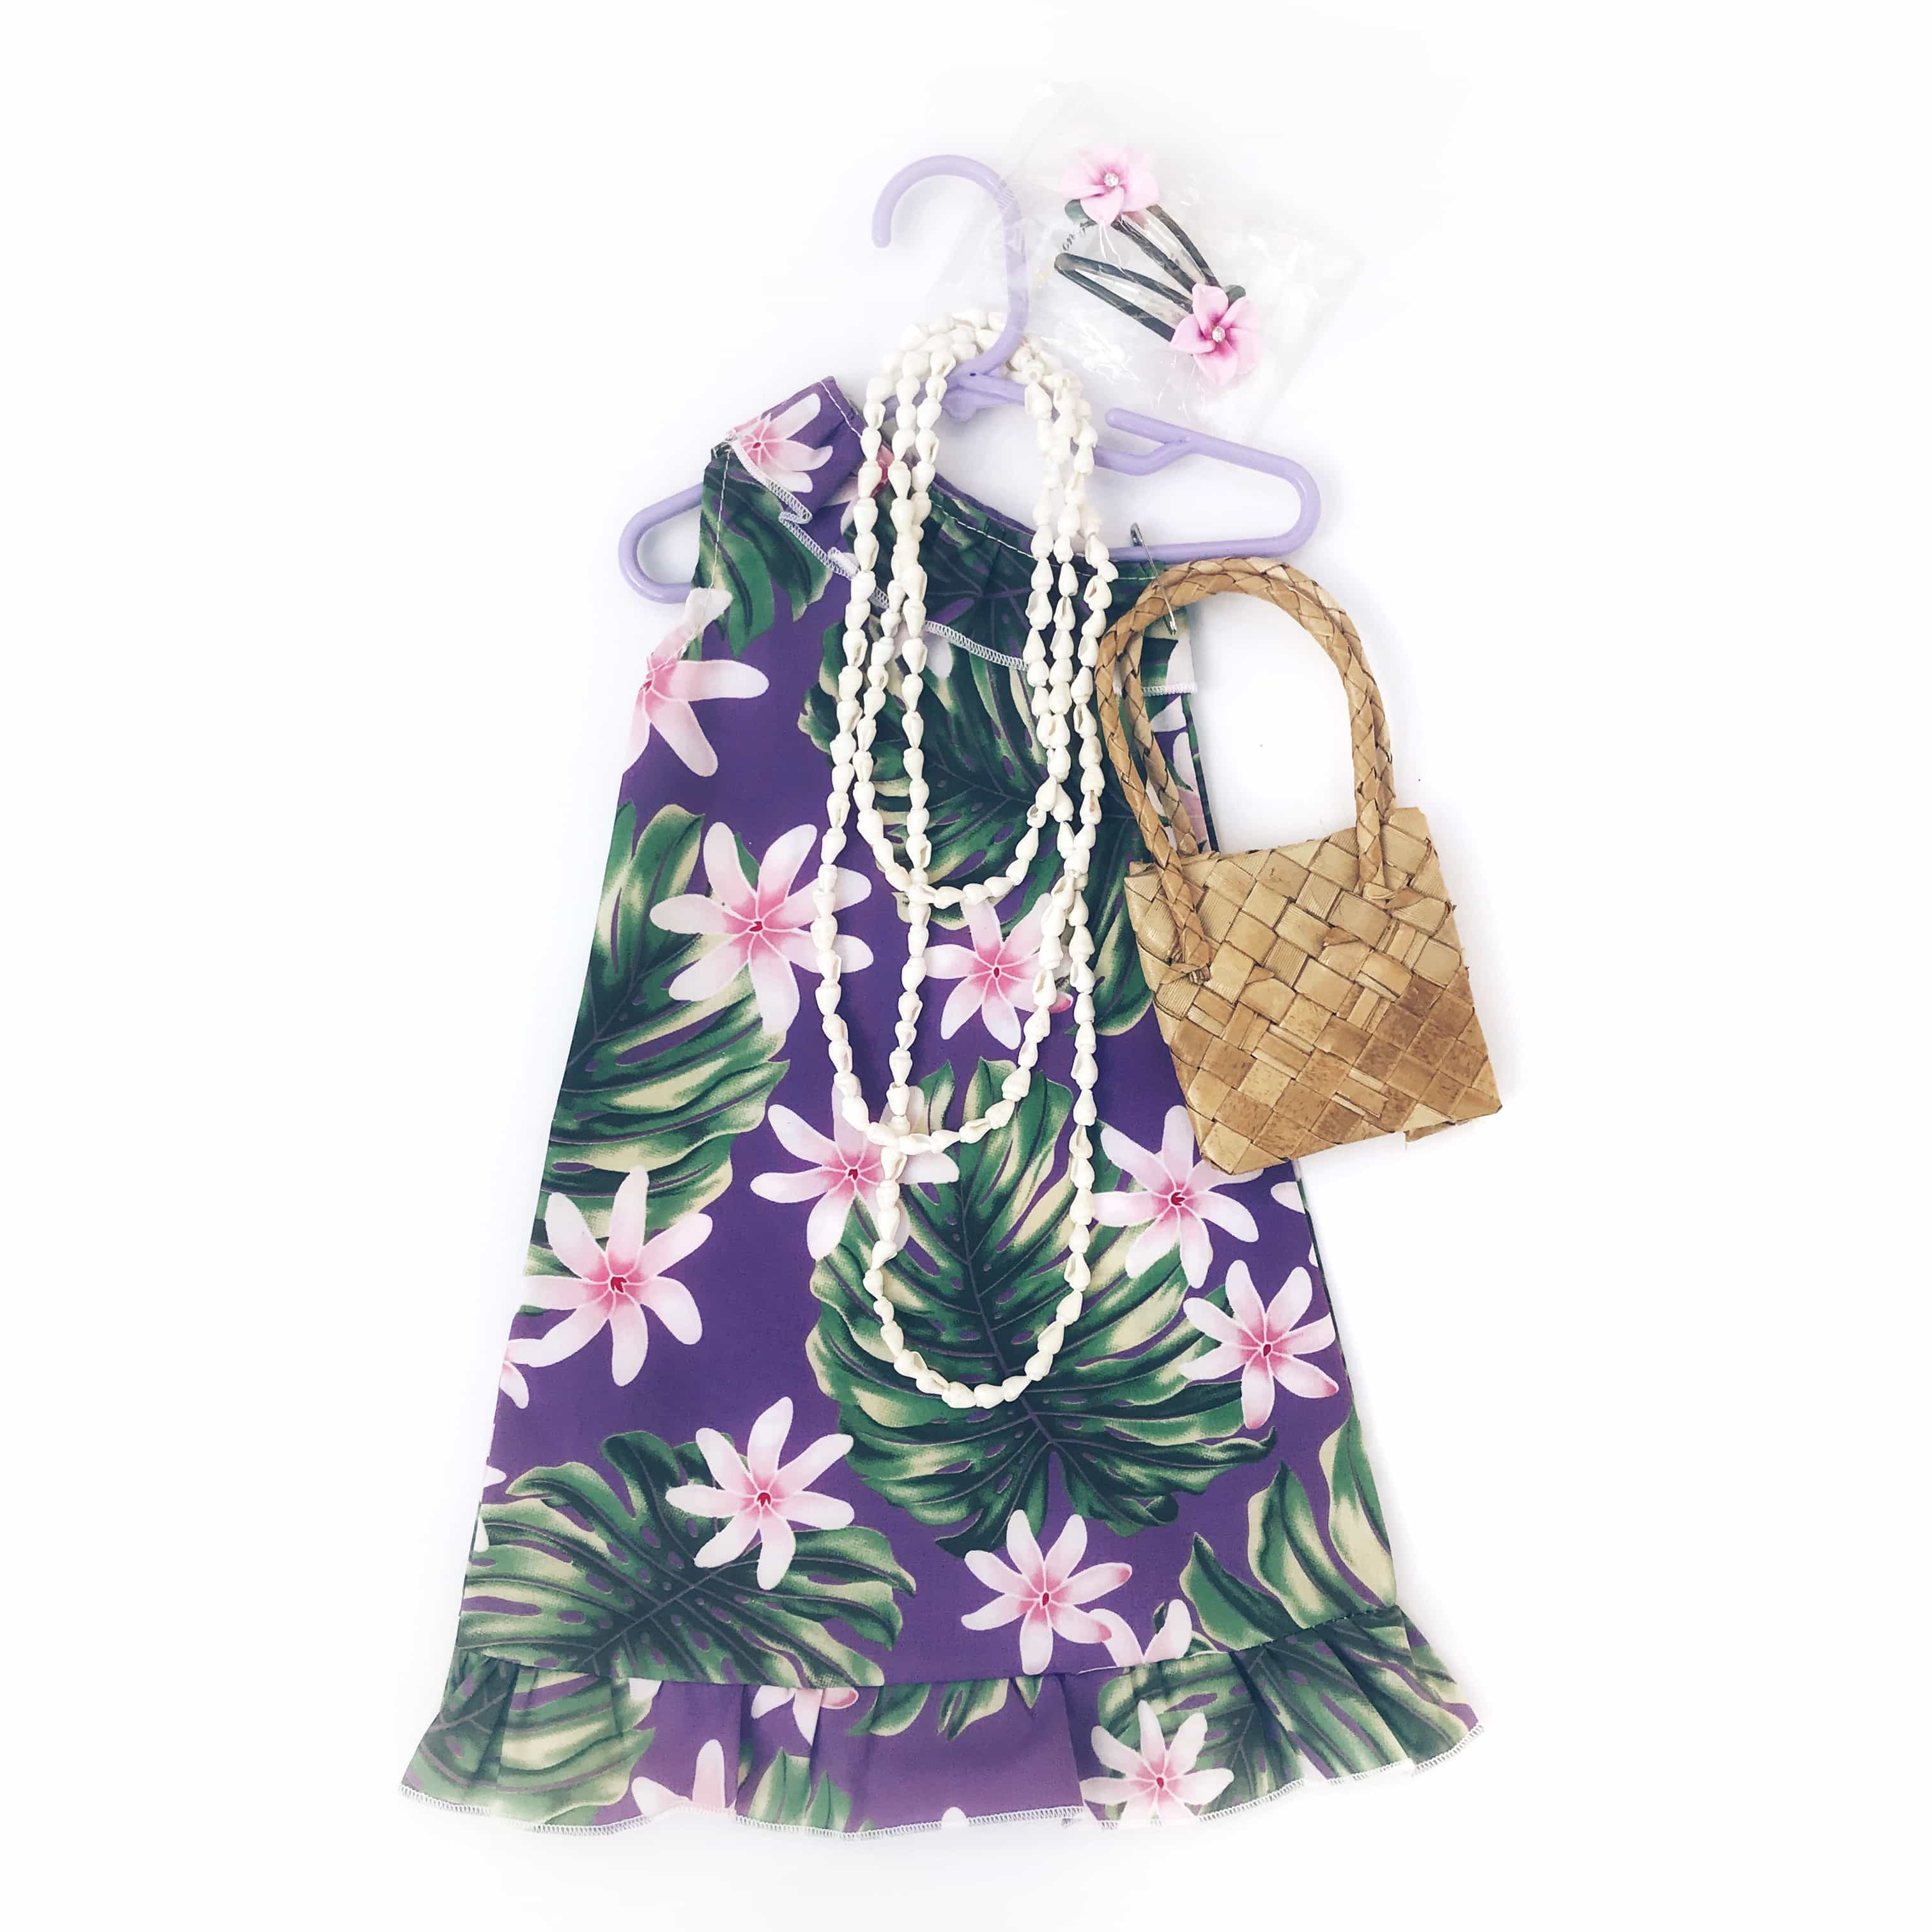 18 inch American girl doll long purple floral Hawaiian holoku hula dress outfit on hanger with shell lei and woven handbag accessories